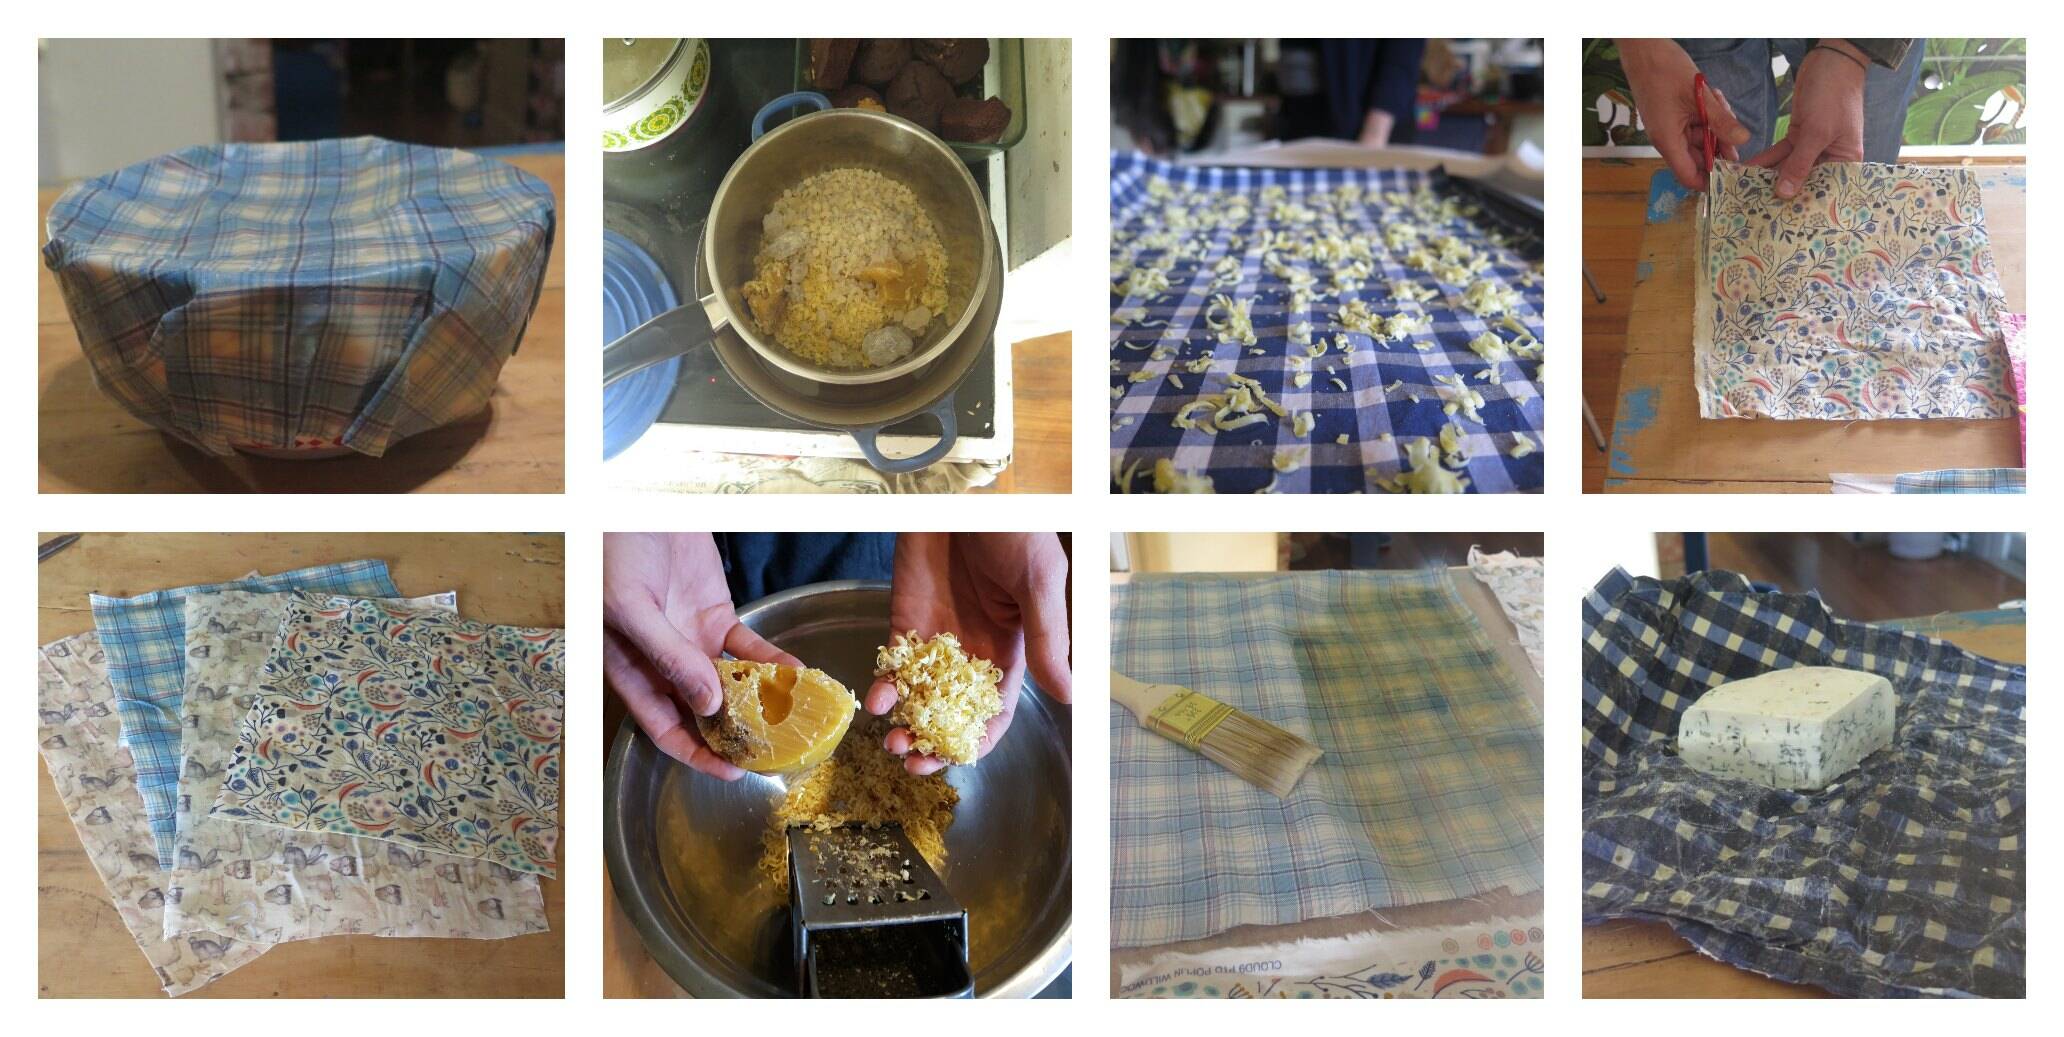 Pine resin substitute for beeswax wraps